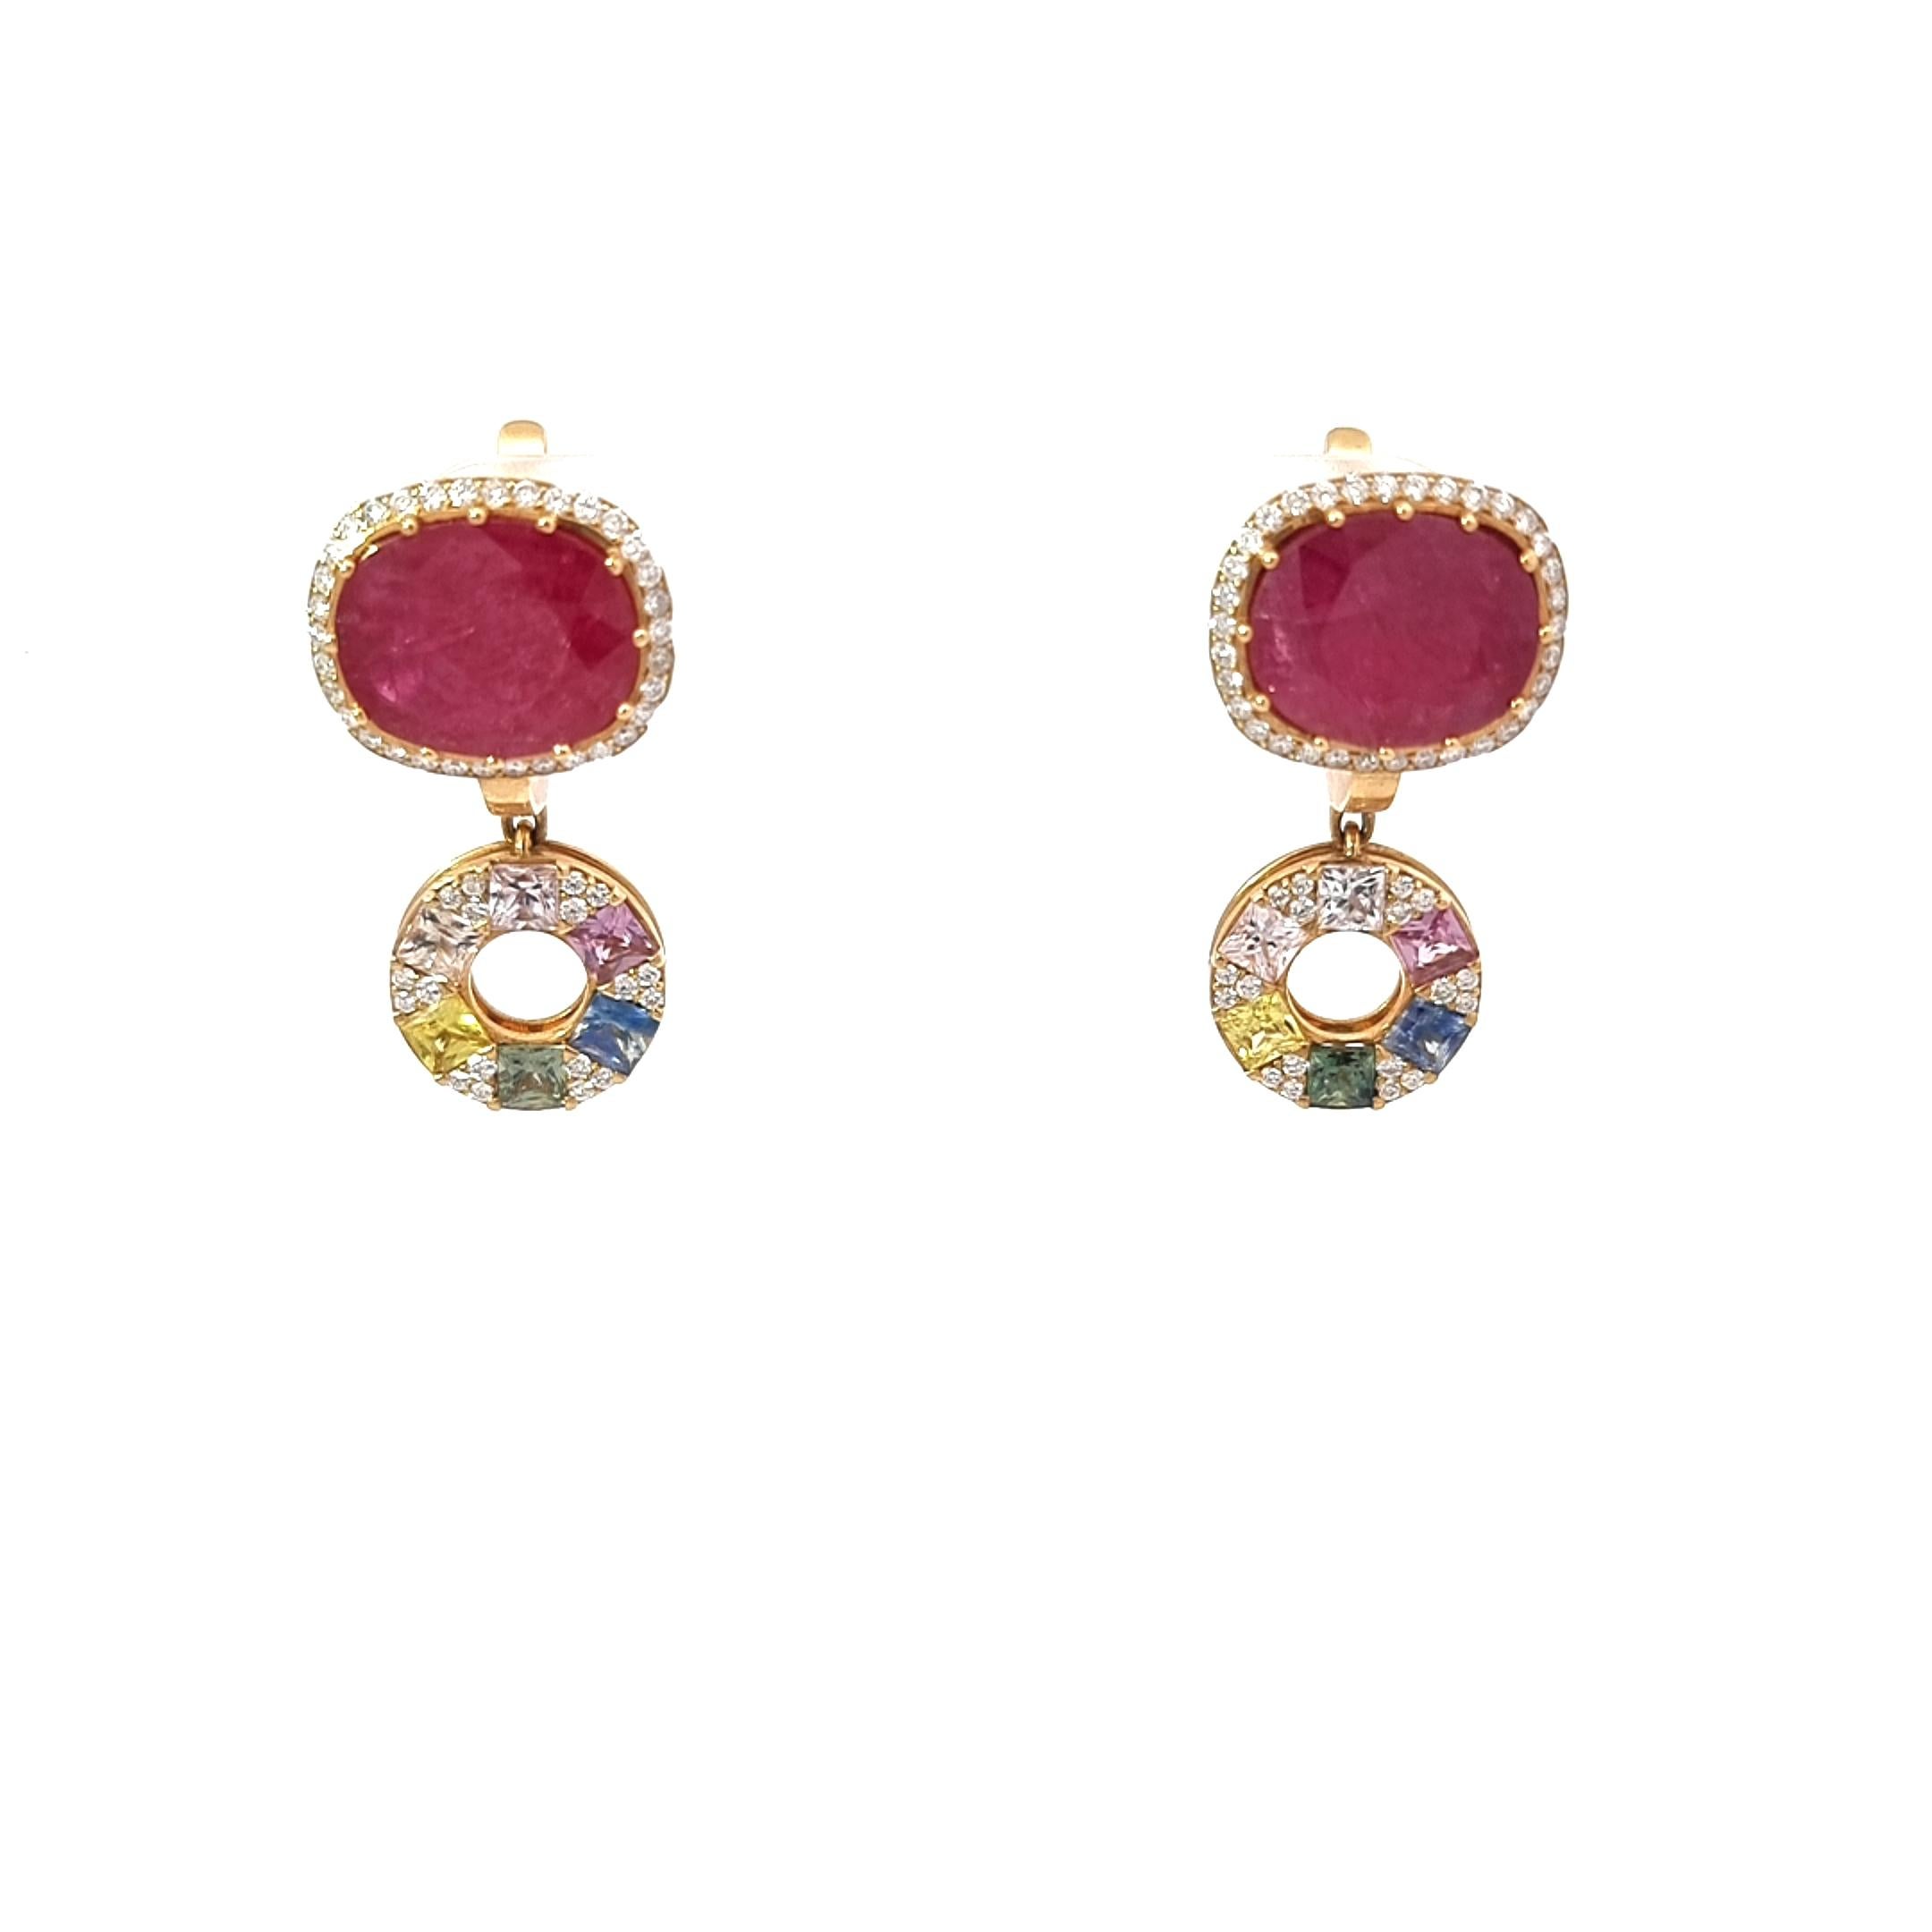 Elevate your elegance with VOTIVE Jewellery's exquisite earrings, a masterpiece of sophistication. Crafted in 18K yellow gold, these earrings showcase the allure of oval rubies, a total of 8.52 carats, symbolizing passion and allure. Accentuating